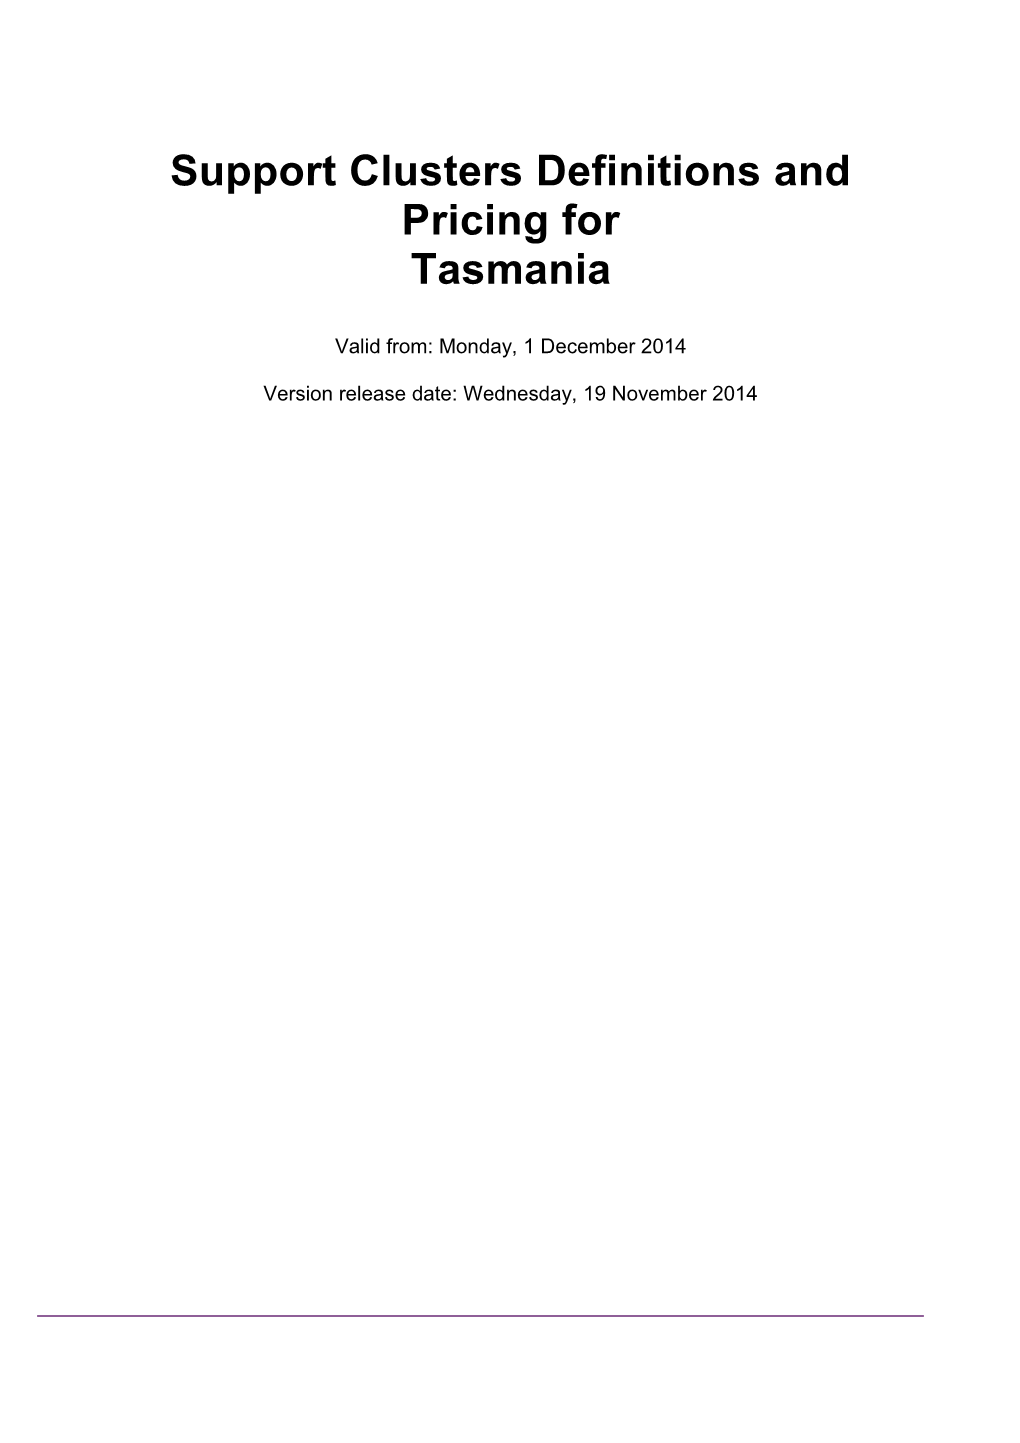 Support Clusters Definitions and Pricing for Tasmania